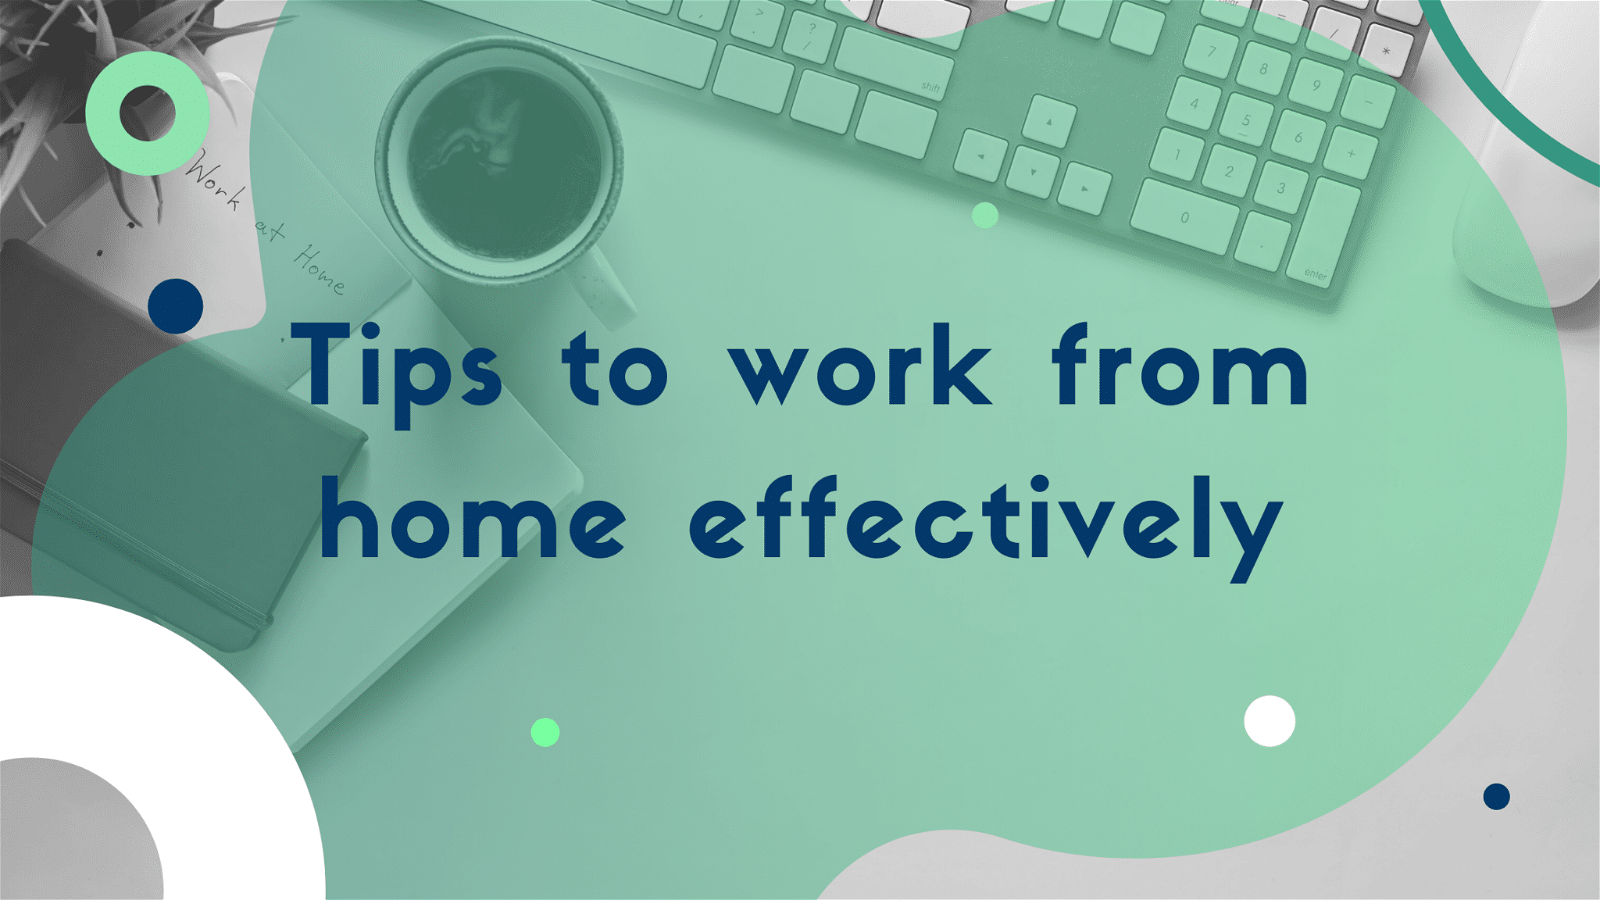 The image is providing tips to help people work effectively from home.